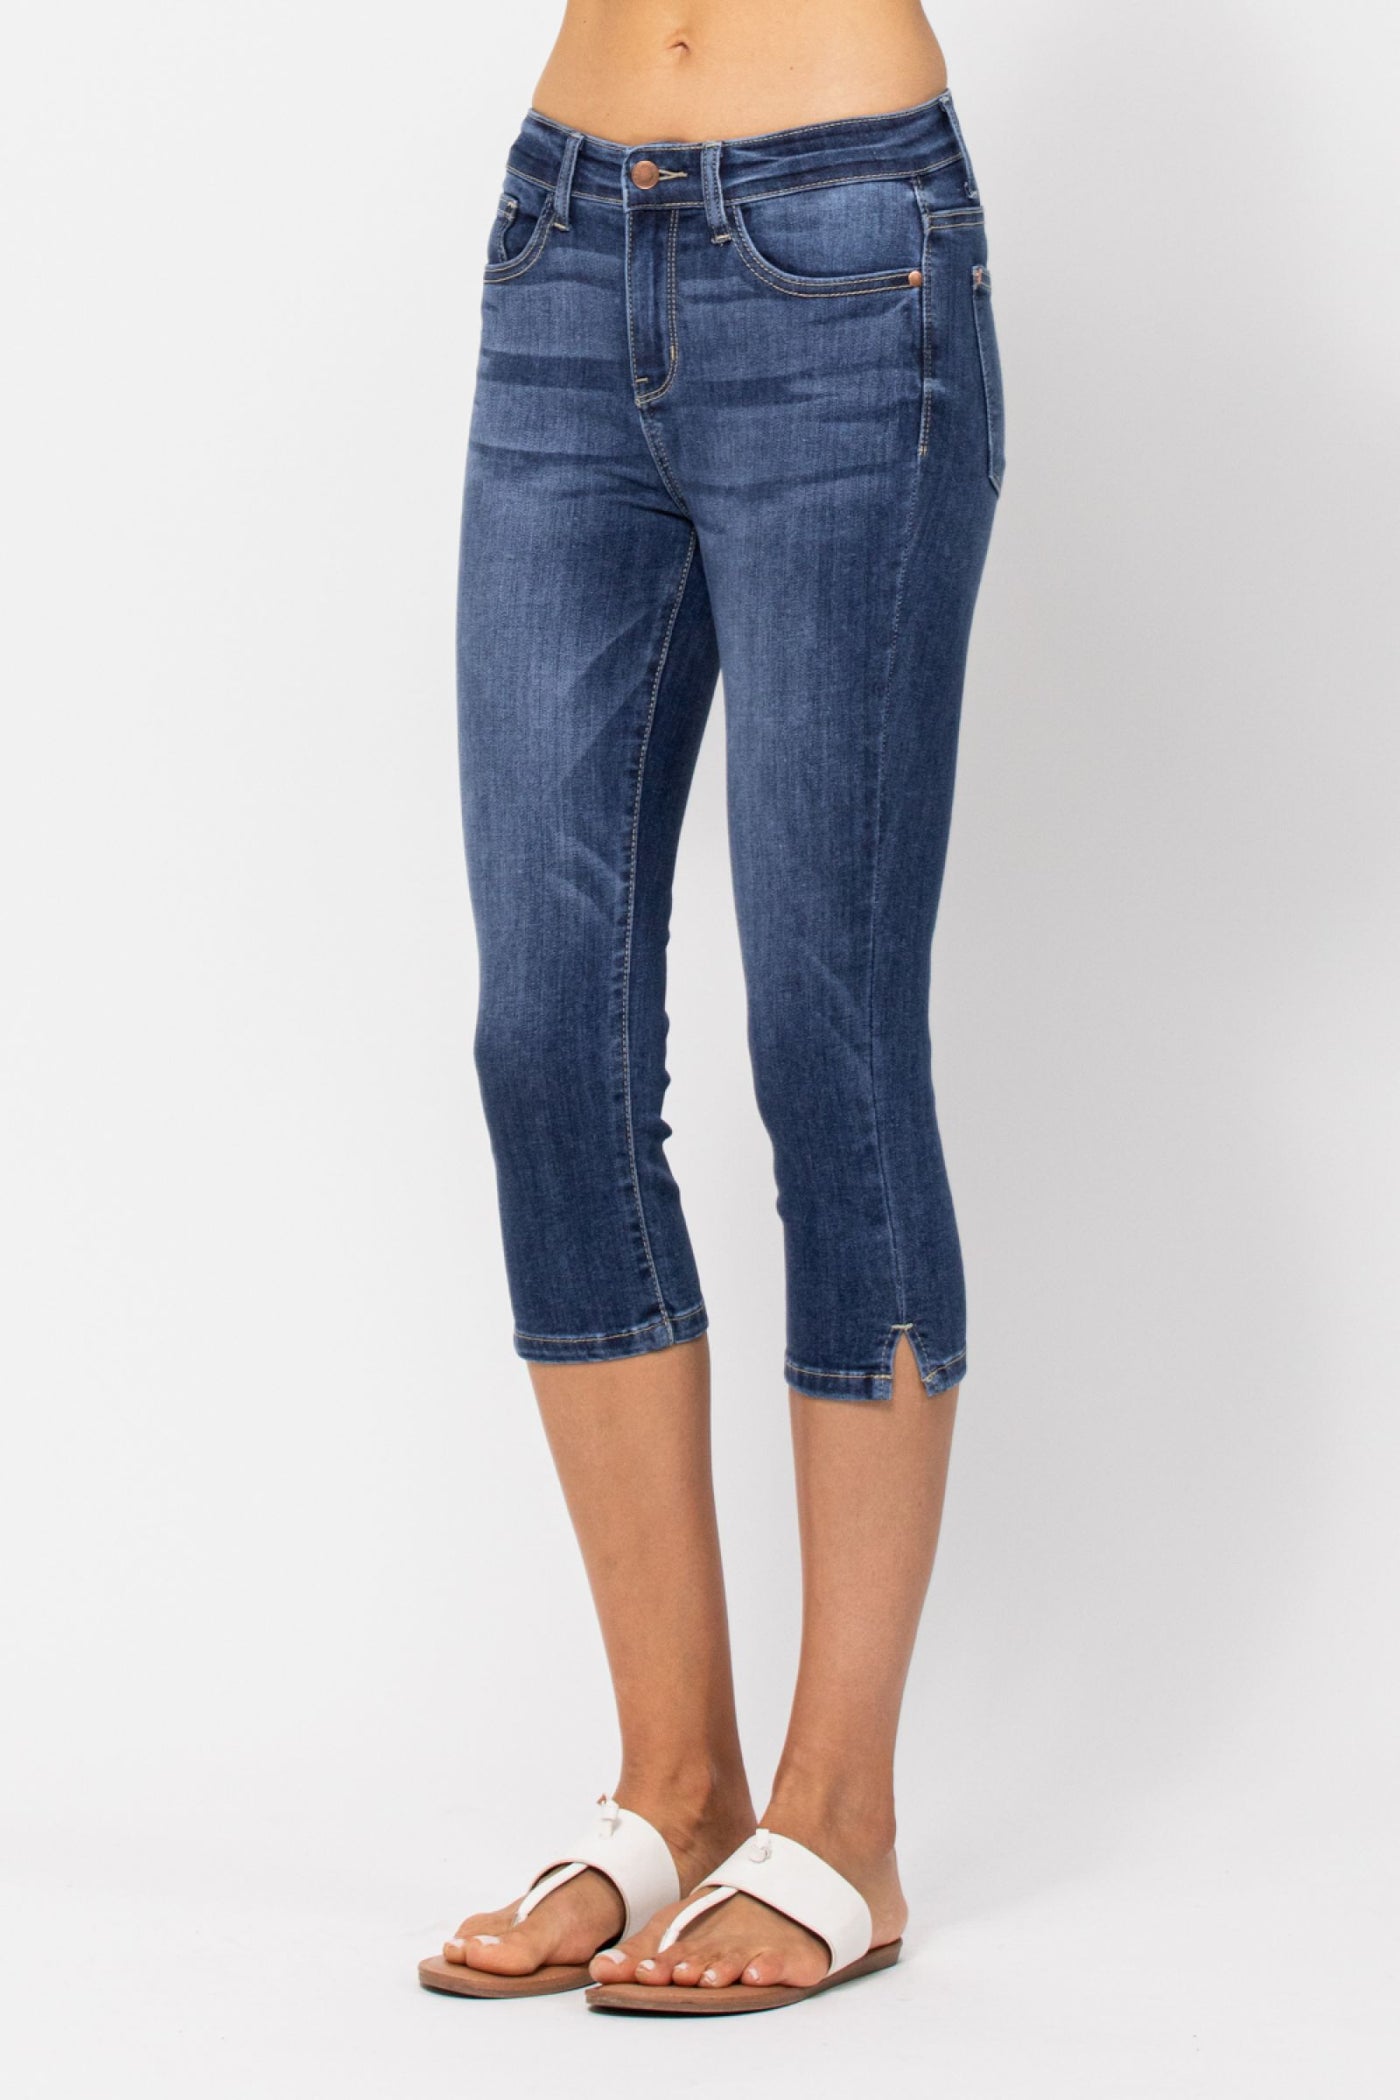 Judy Blue Capri Skinny - Corinne Boutique Family Owned and Operated USA